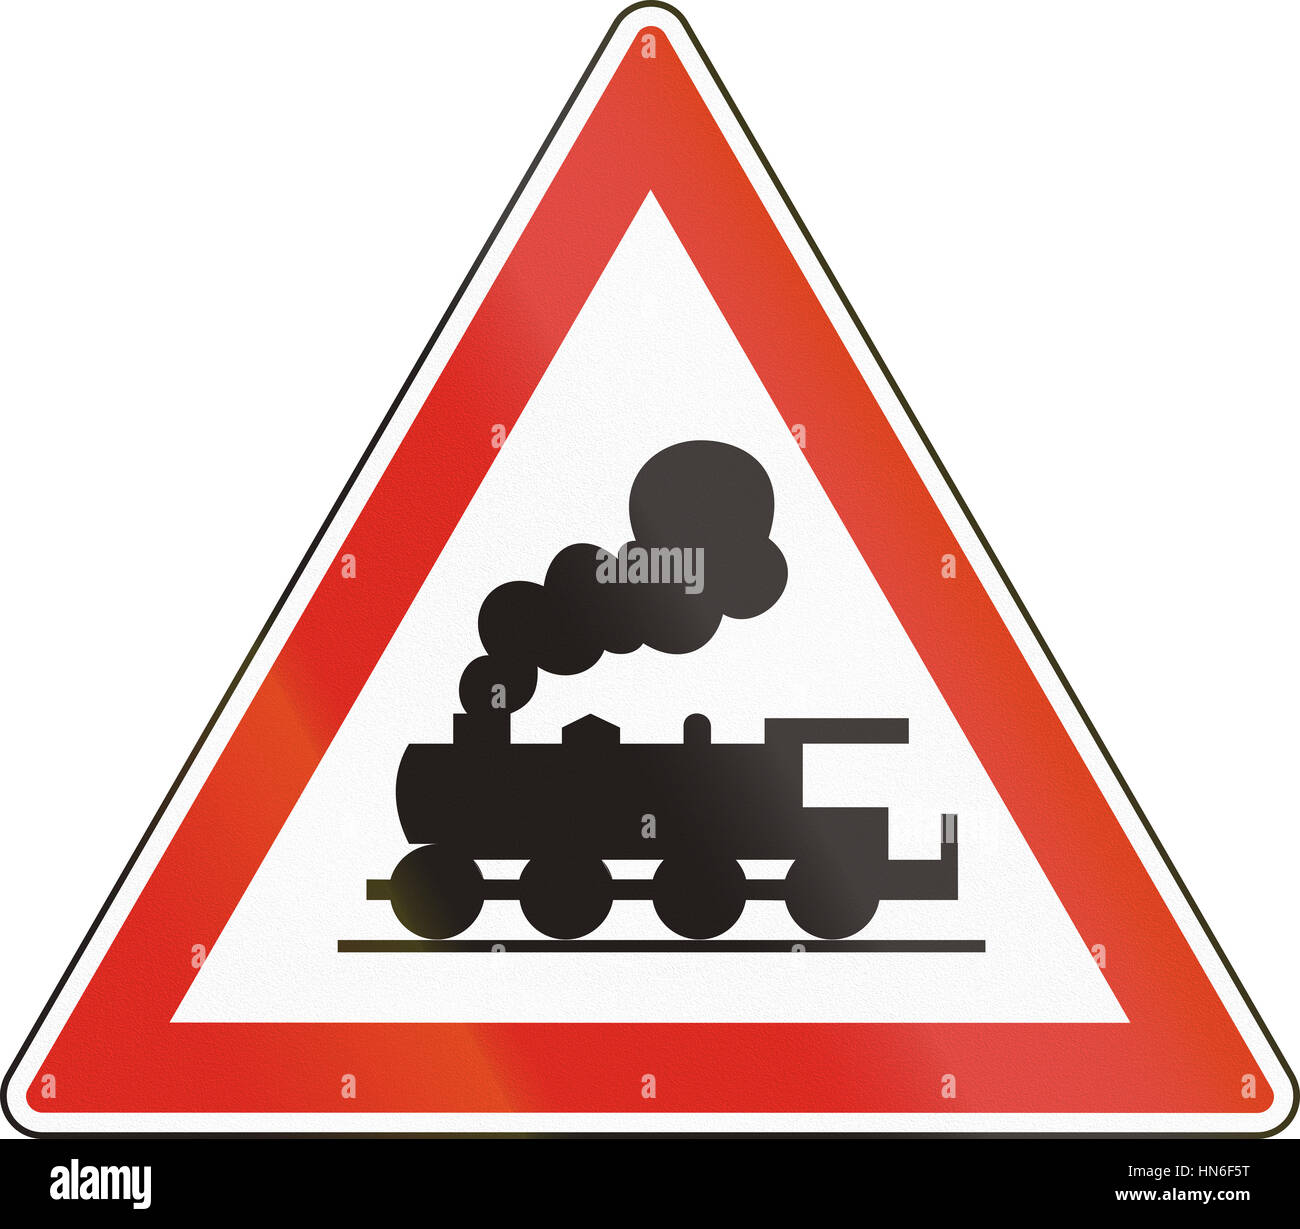 Level Crossing Without Barrier Road Sign On White Background Stock Photo Alamy